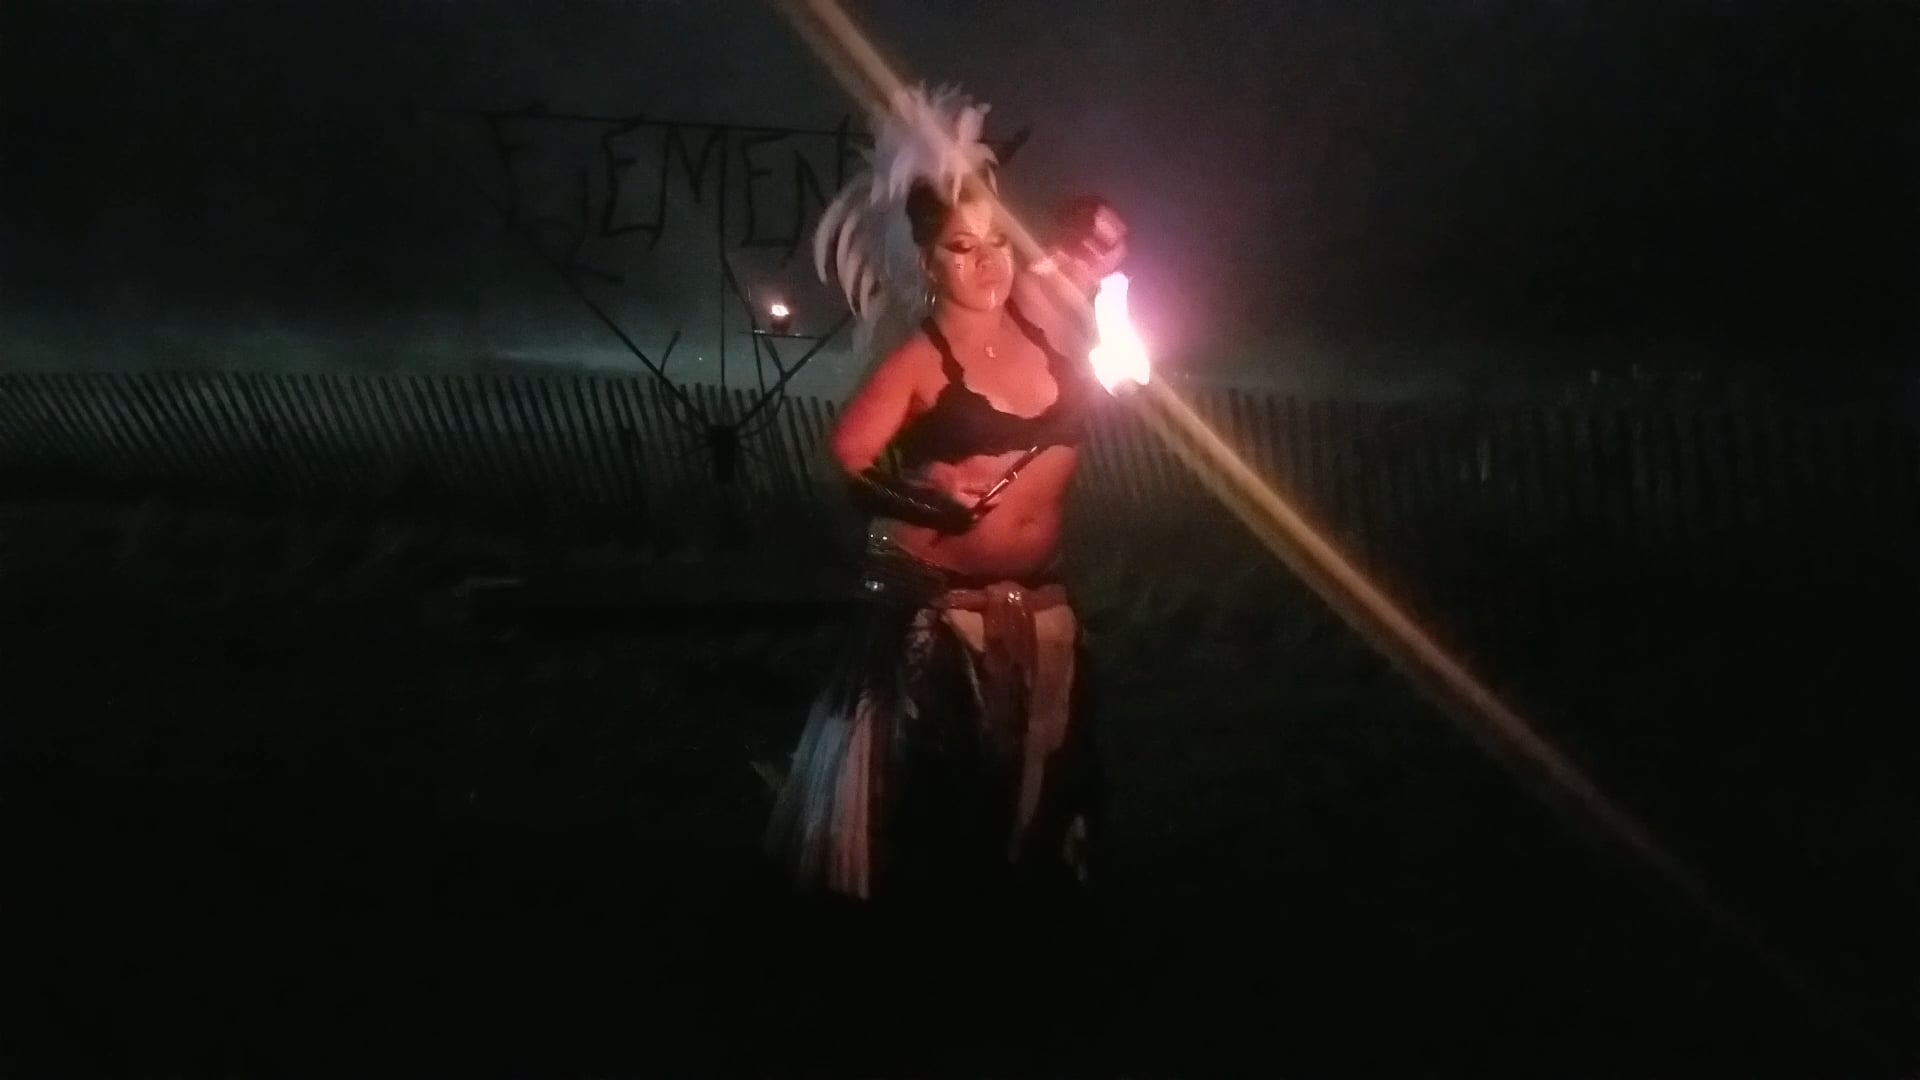 Promotional video thumbnail 1 for Leona Beretta, Tribal Fusion Fire Belly Dancer